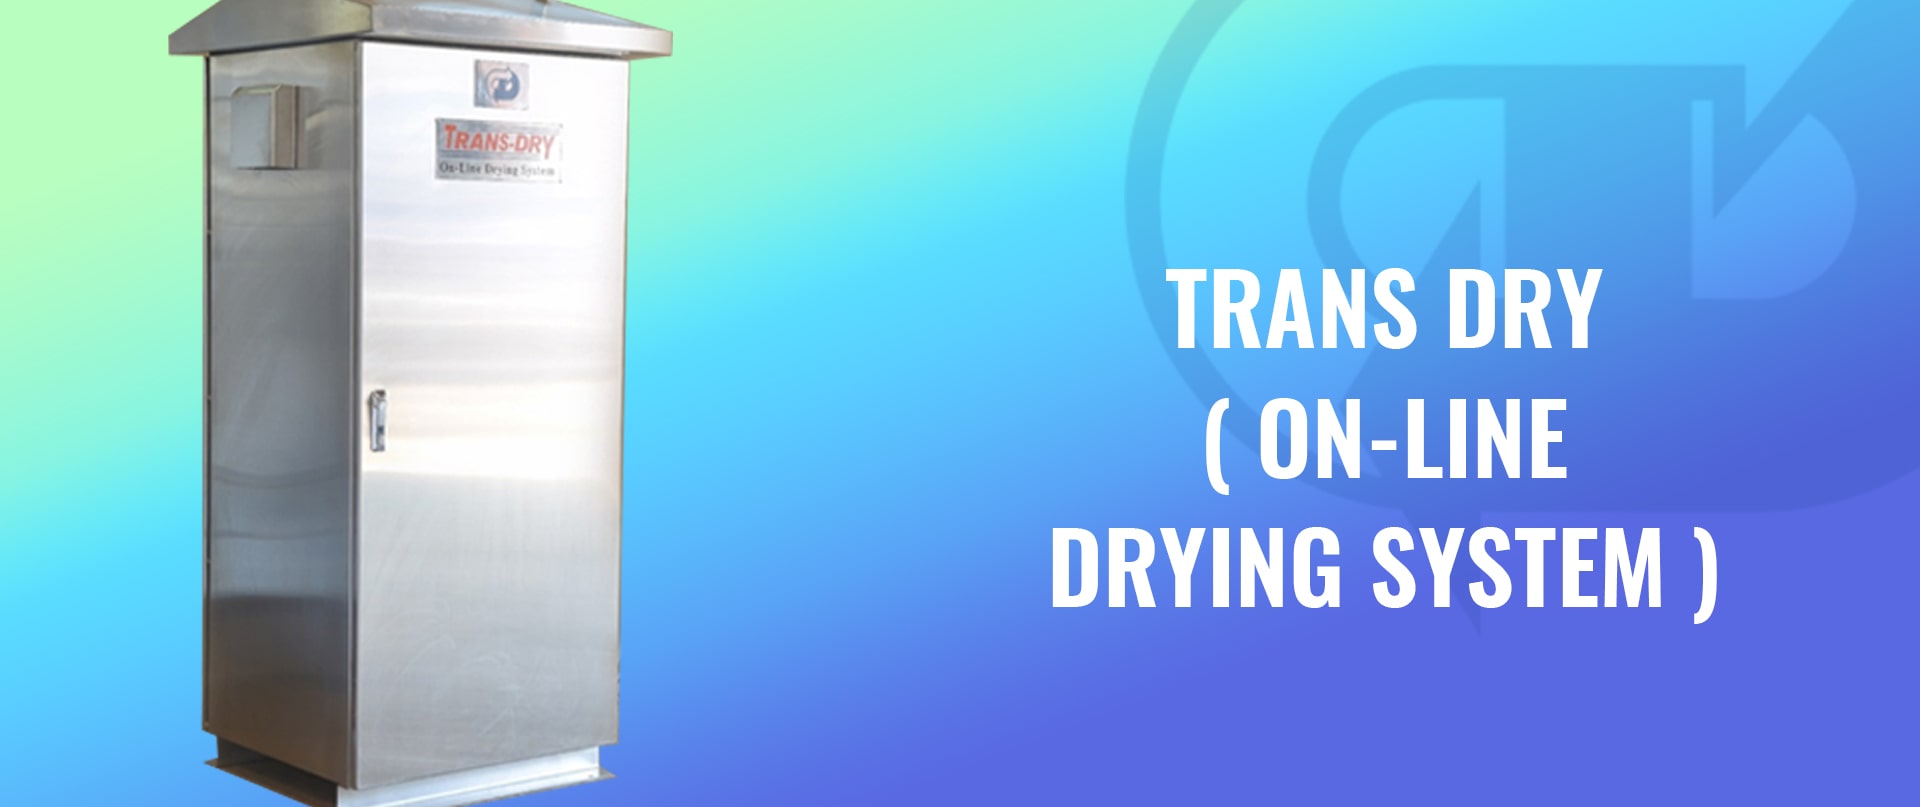 Trans Dry (On-line Drying System)